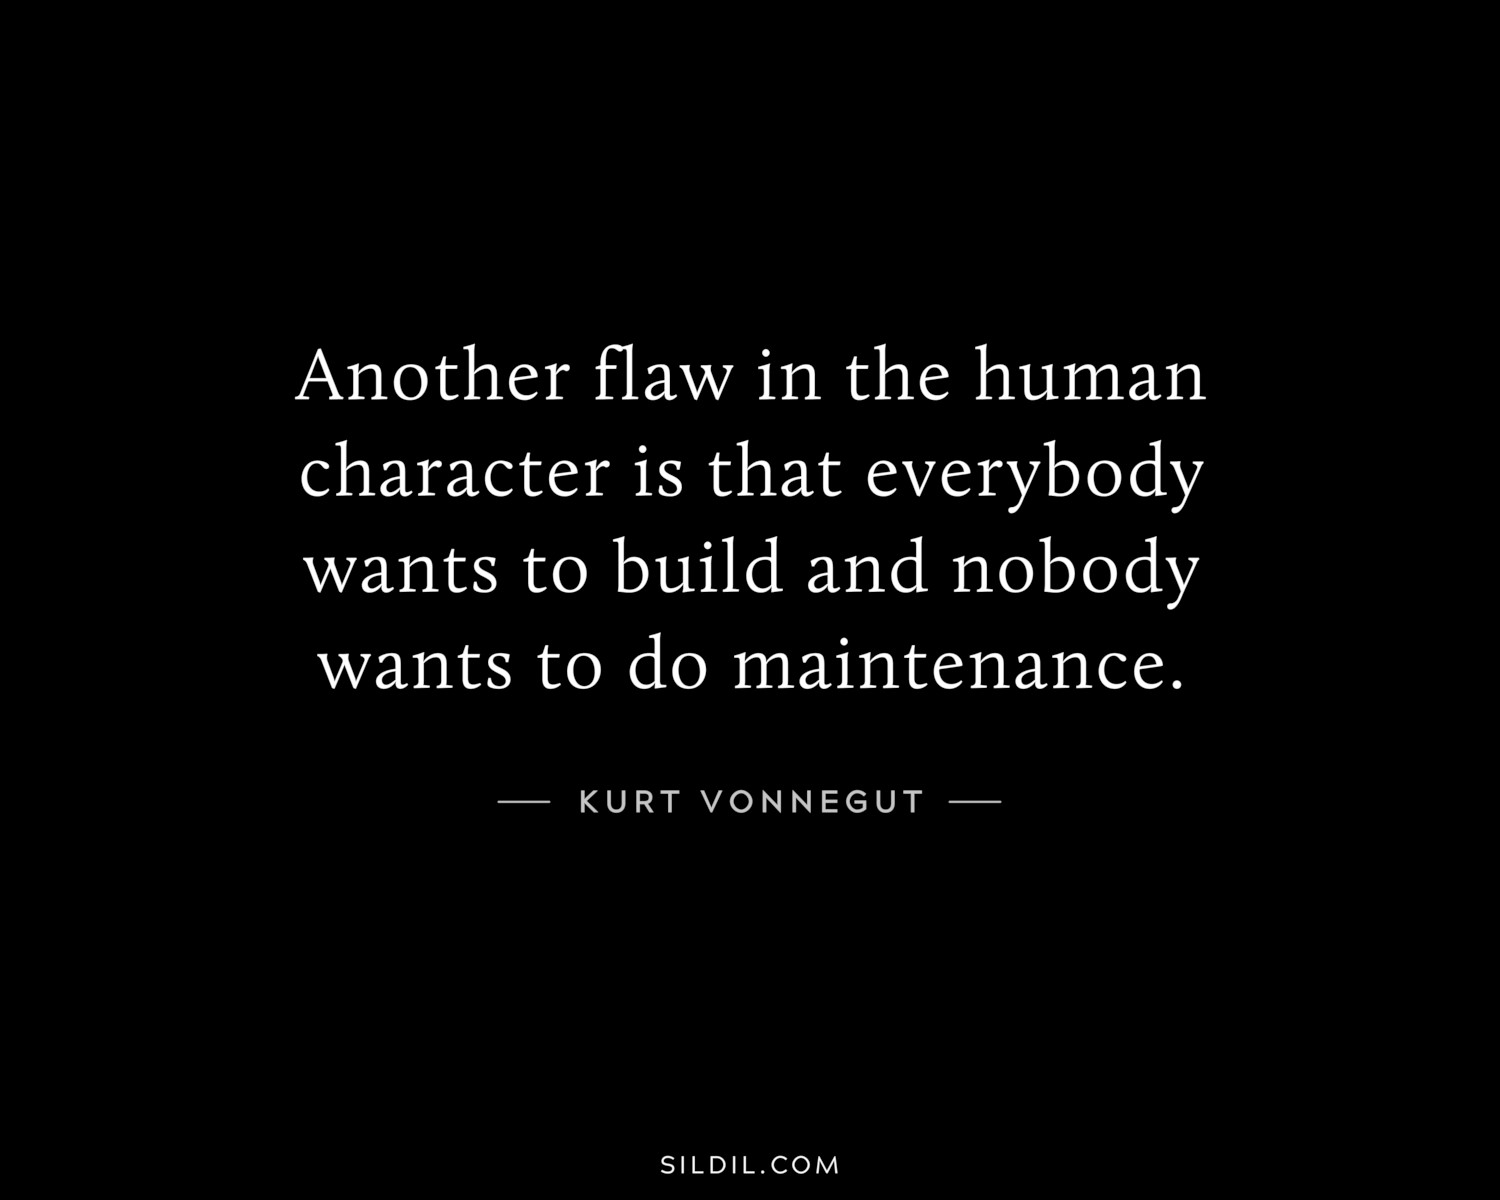 Another flaw in the human character is that everybody wants to build and nobody wants to do maintenance.